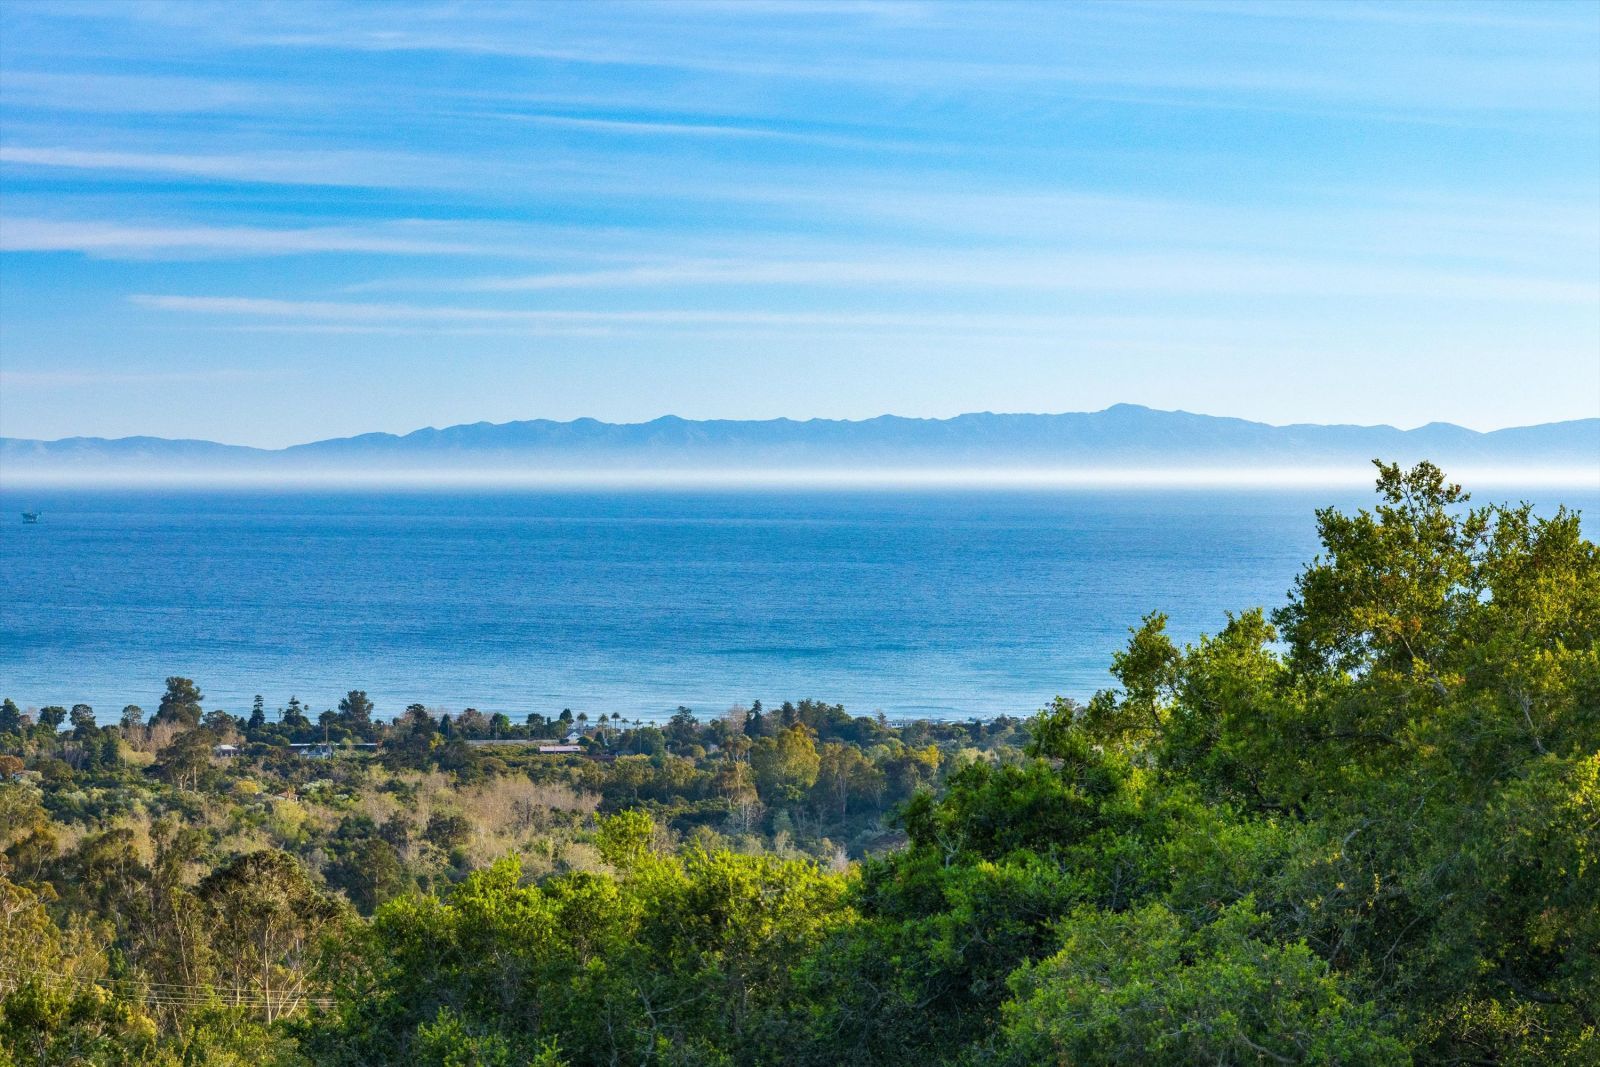 A view of the Pacific Ocean, with the Channel Islands in the distance and green foliage in the foreground.